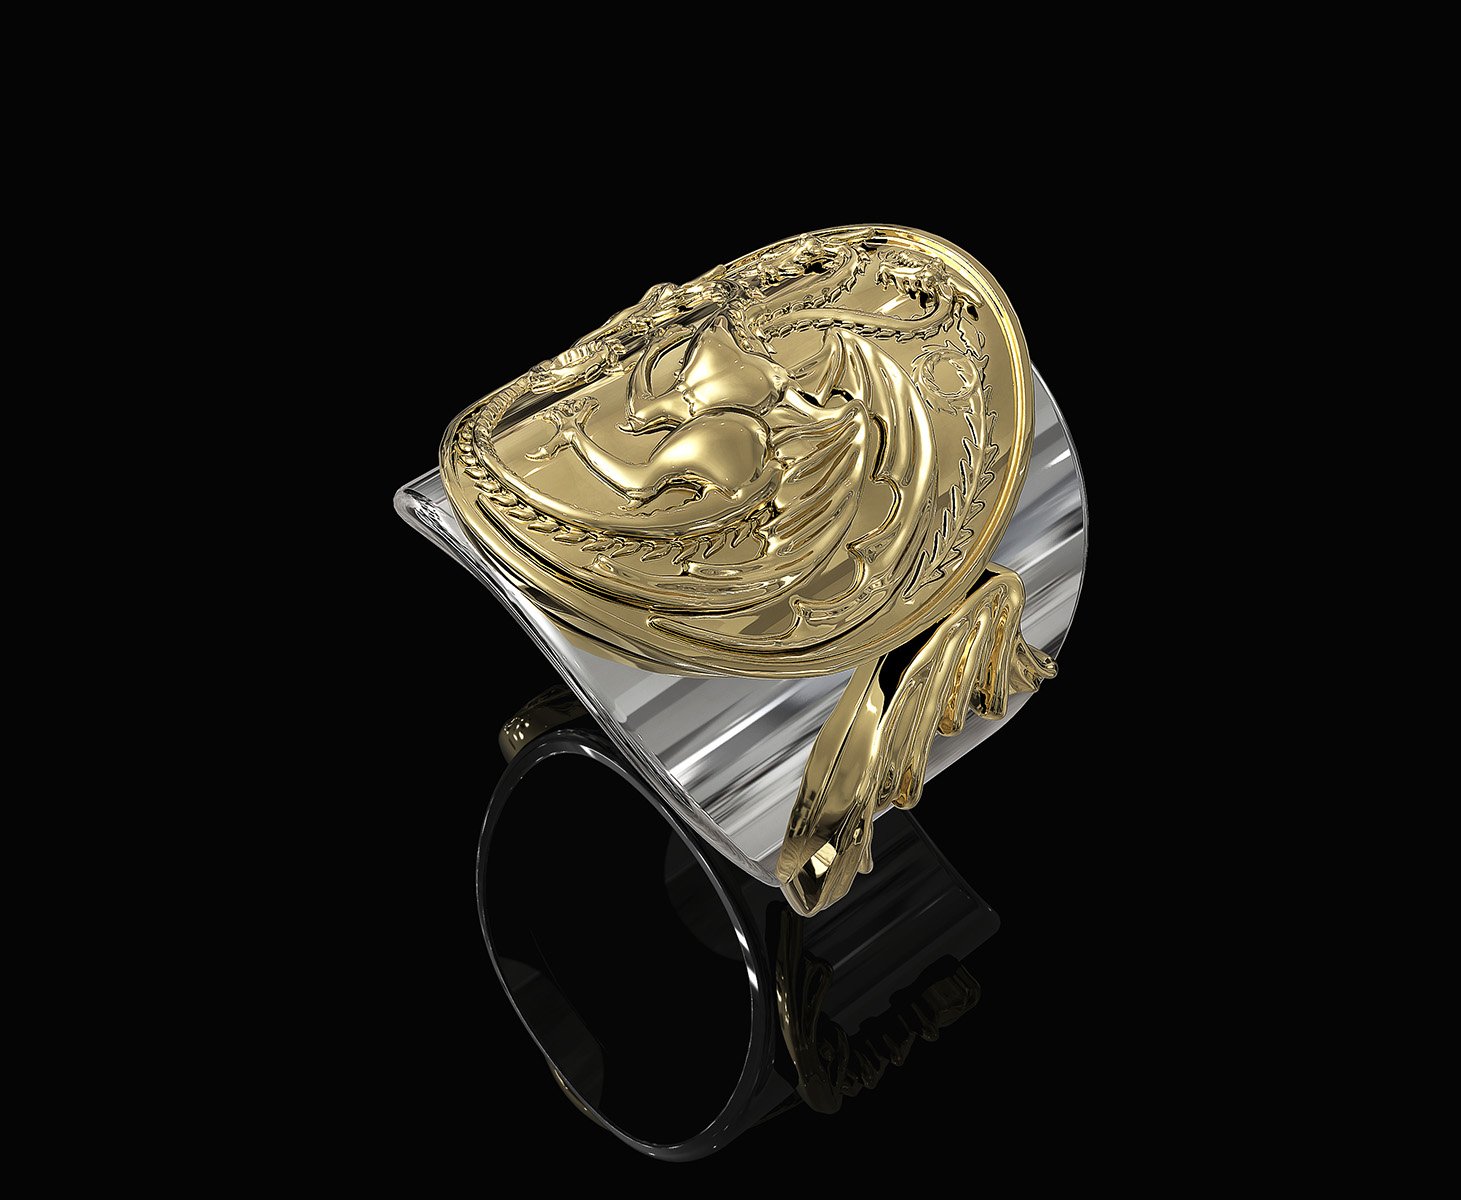 Currently obsessed with this House of the Dragon crown ring from Game ... |  TikTok